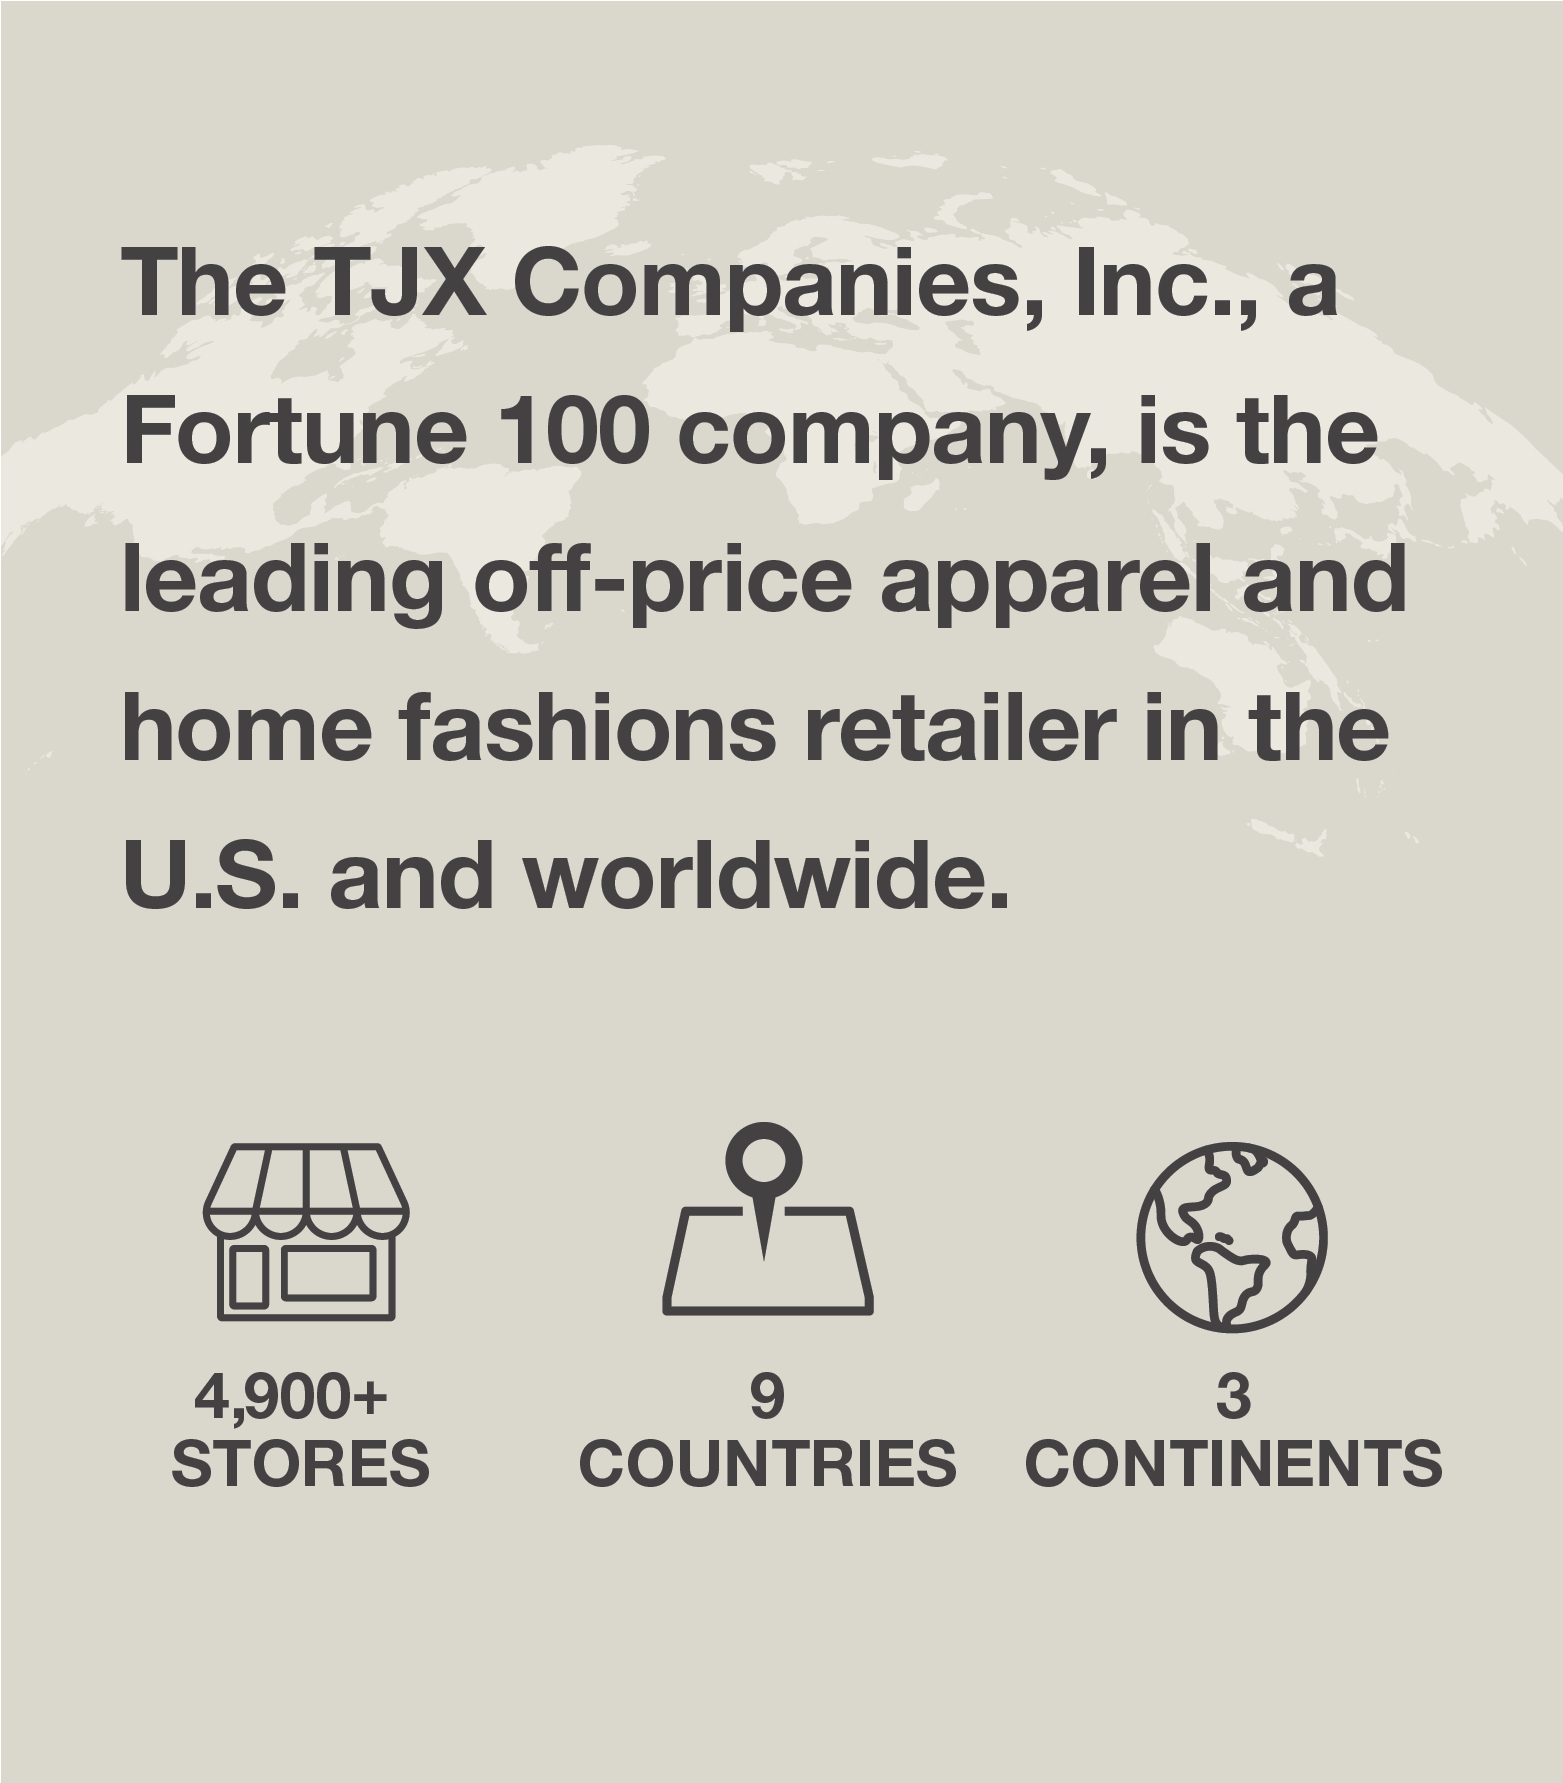 tjx leading off price apparel home fashions retailer sm